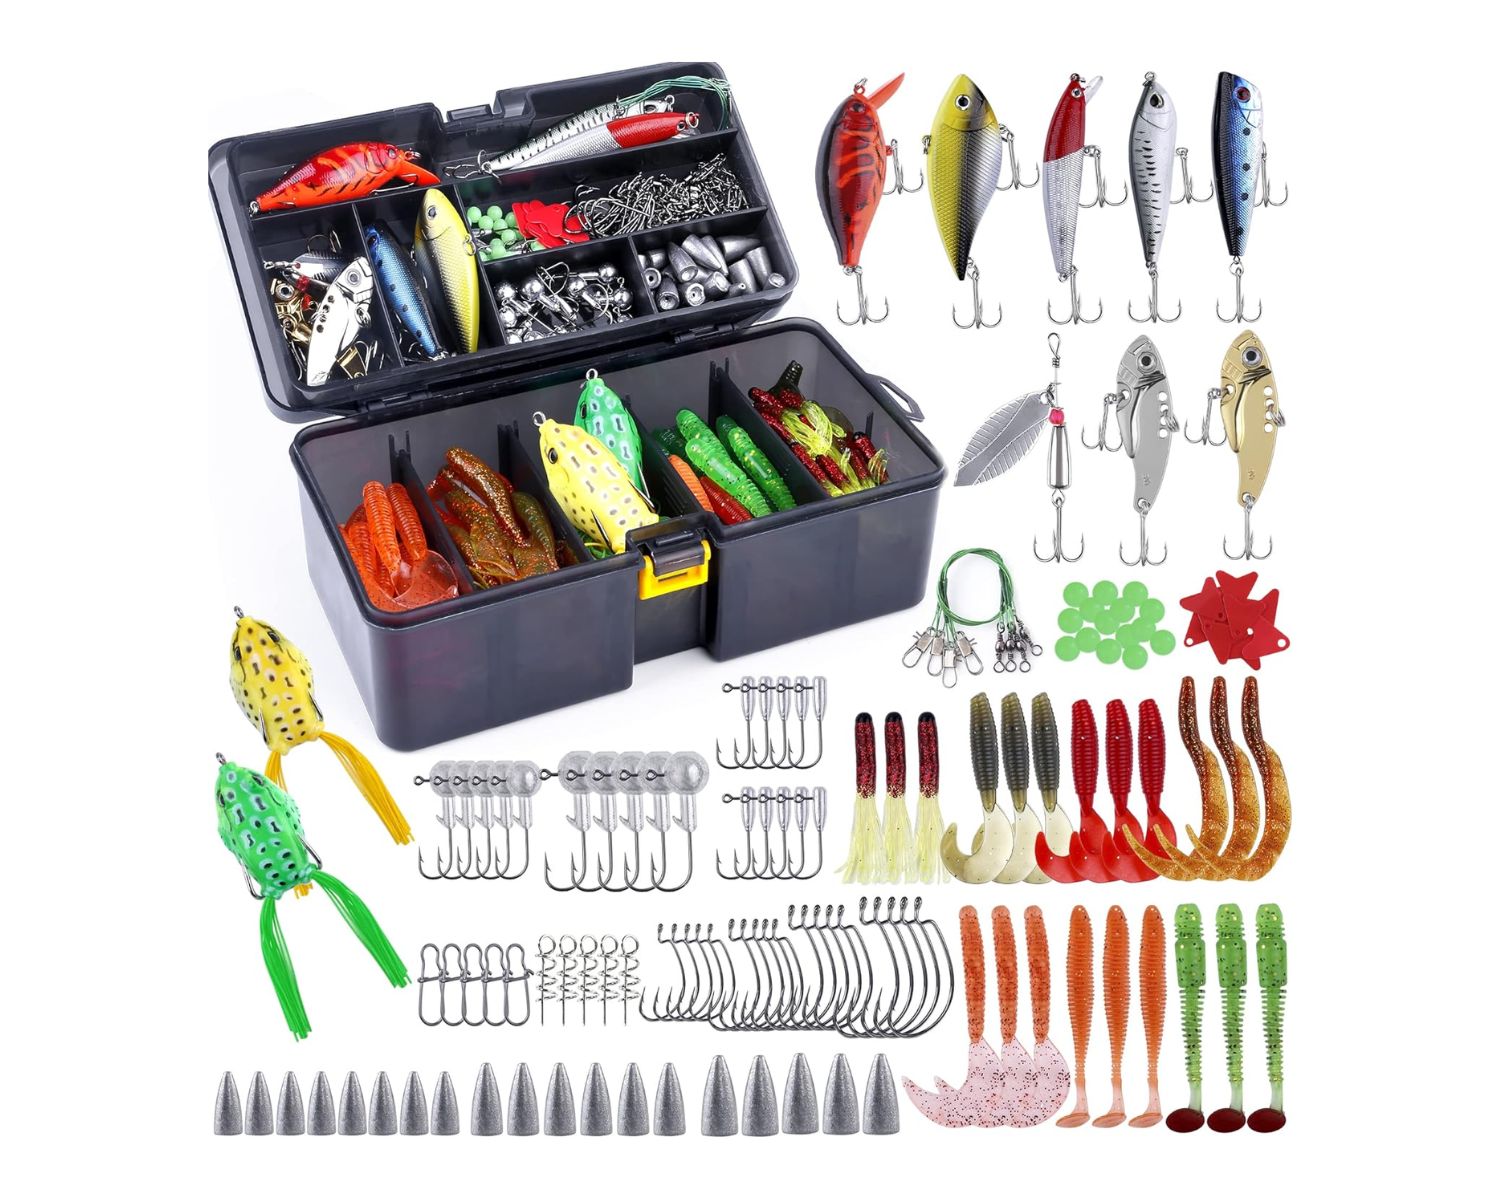 Bait and Tackle Kit Review: The Perfect Gear for Anglers